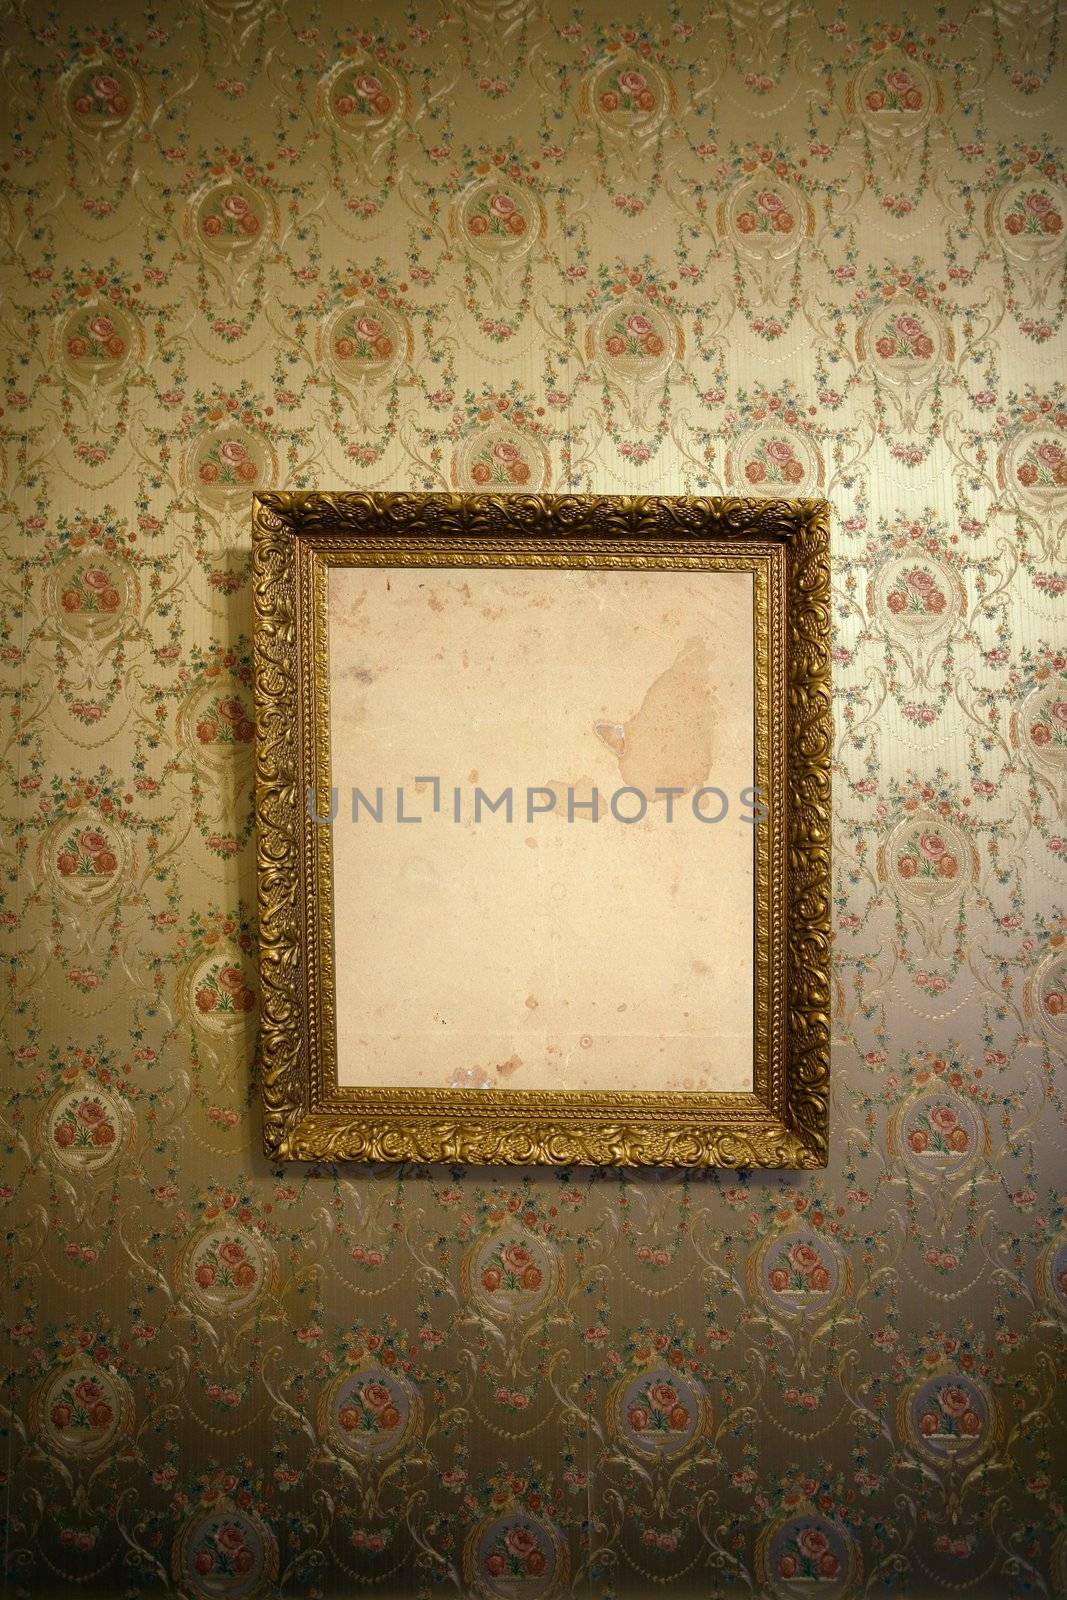 Photo of an antique frame hanging on a wall with vintage wallpaper.